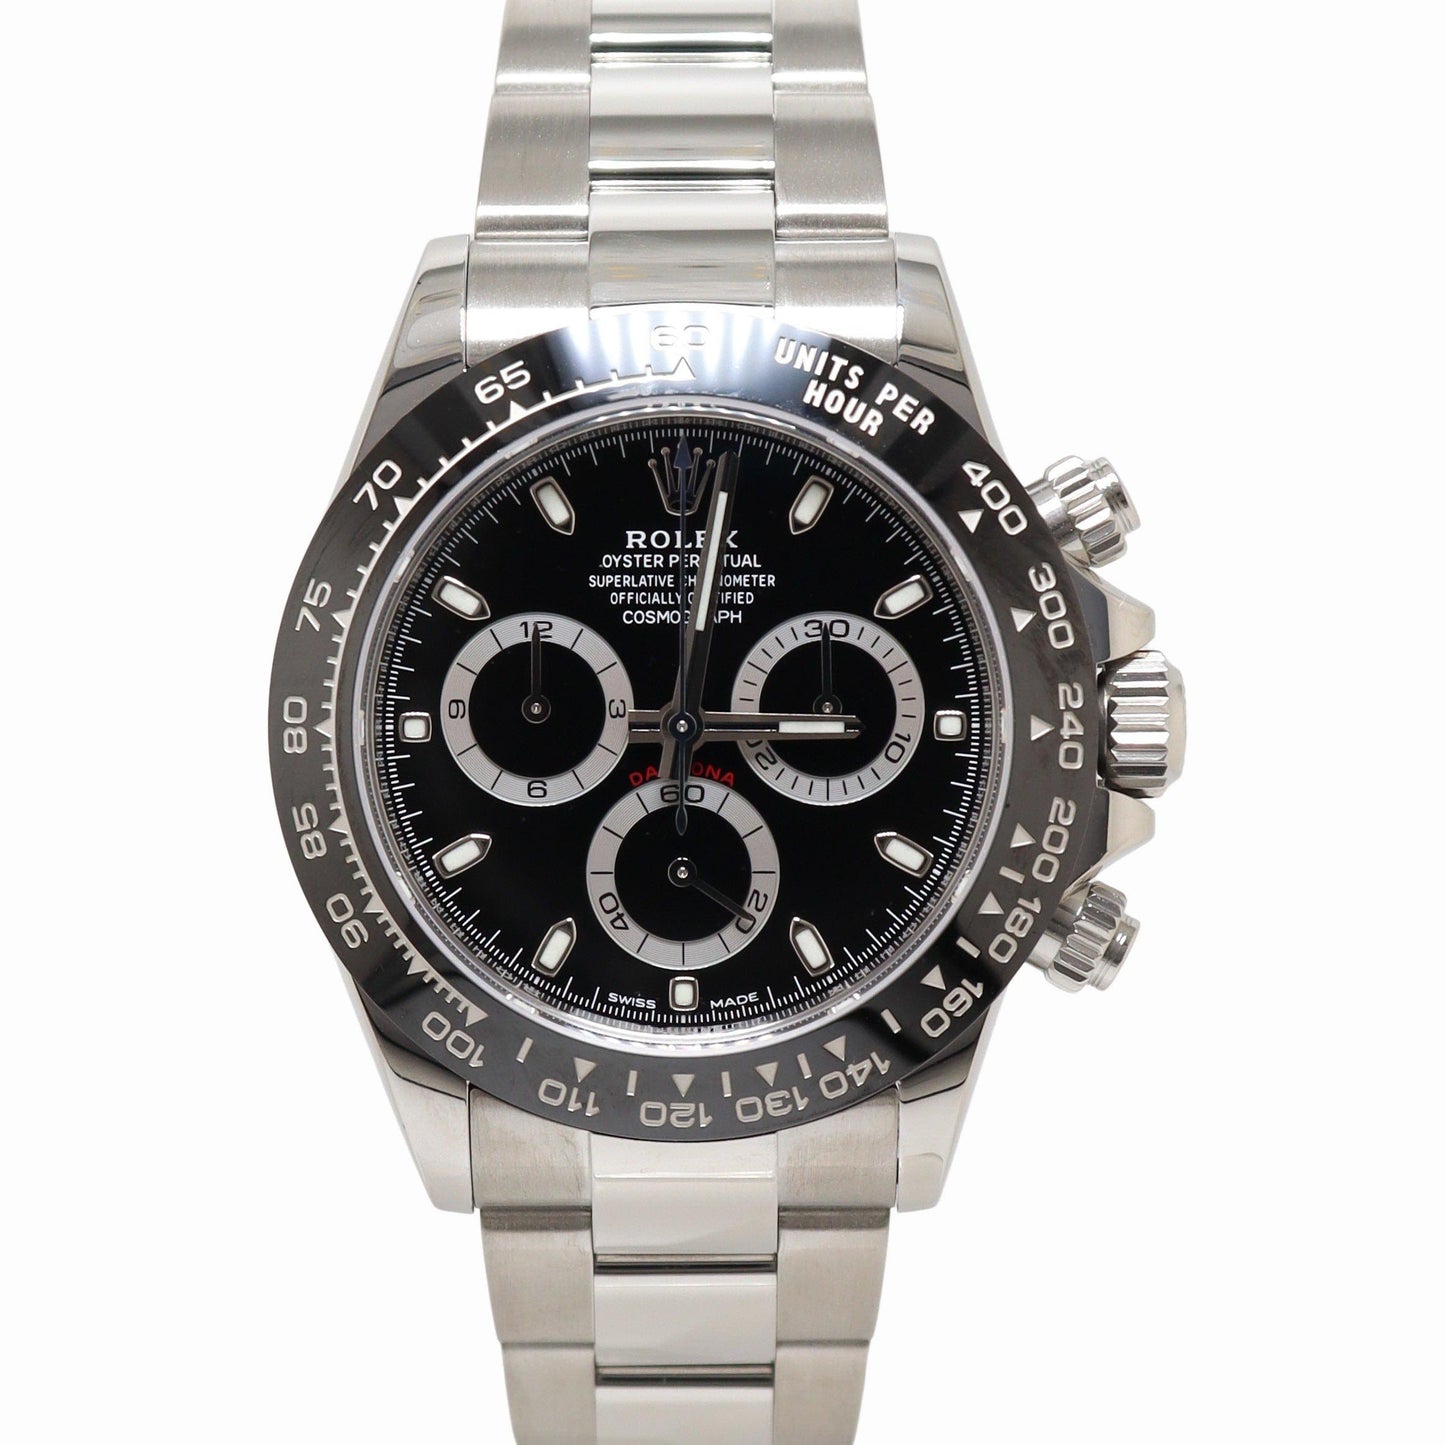 Rolex Daytona Stainless Steel 40mm Black Chronograph Dial Watch Reference# 116500LN